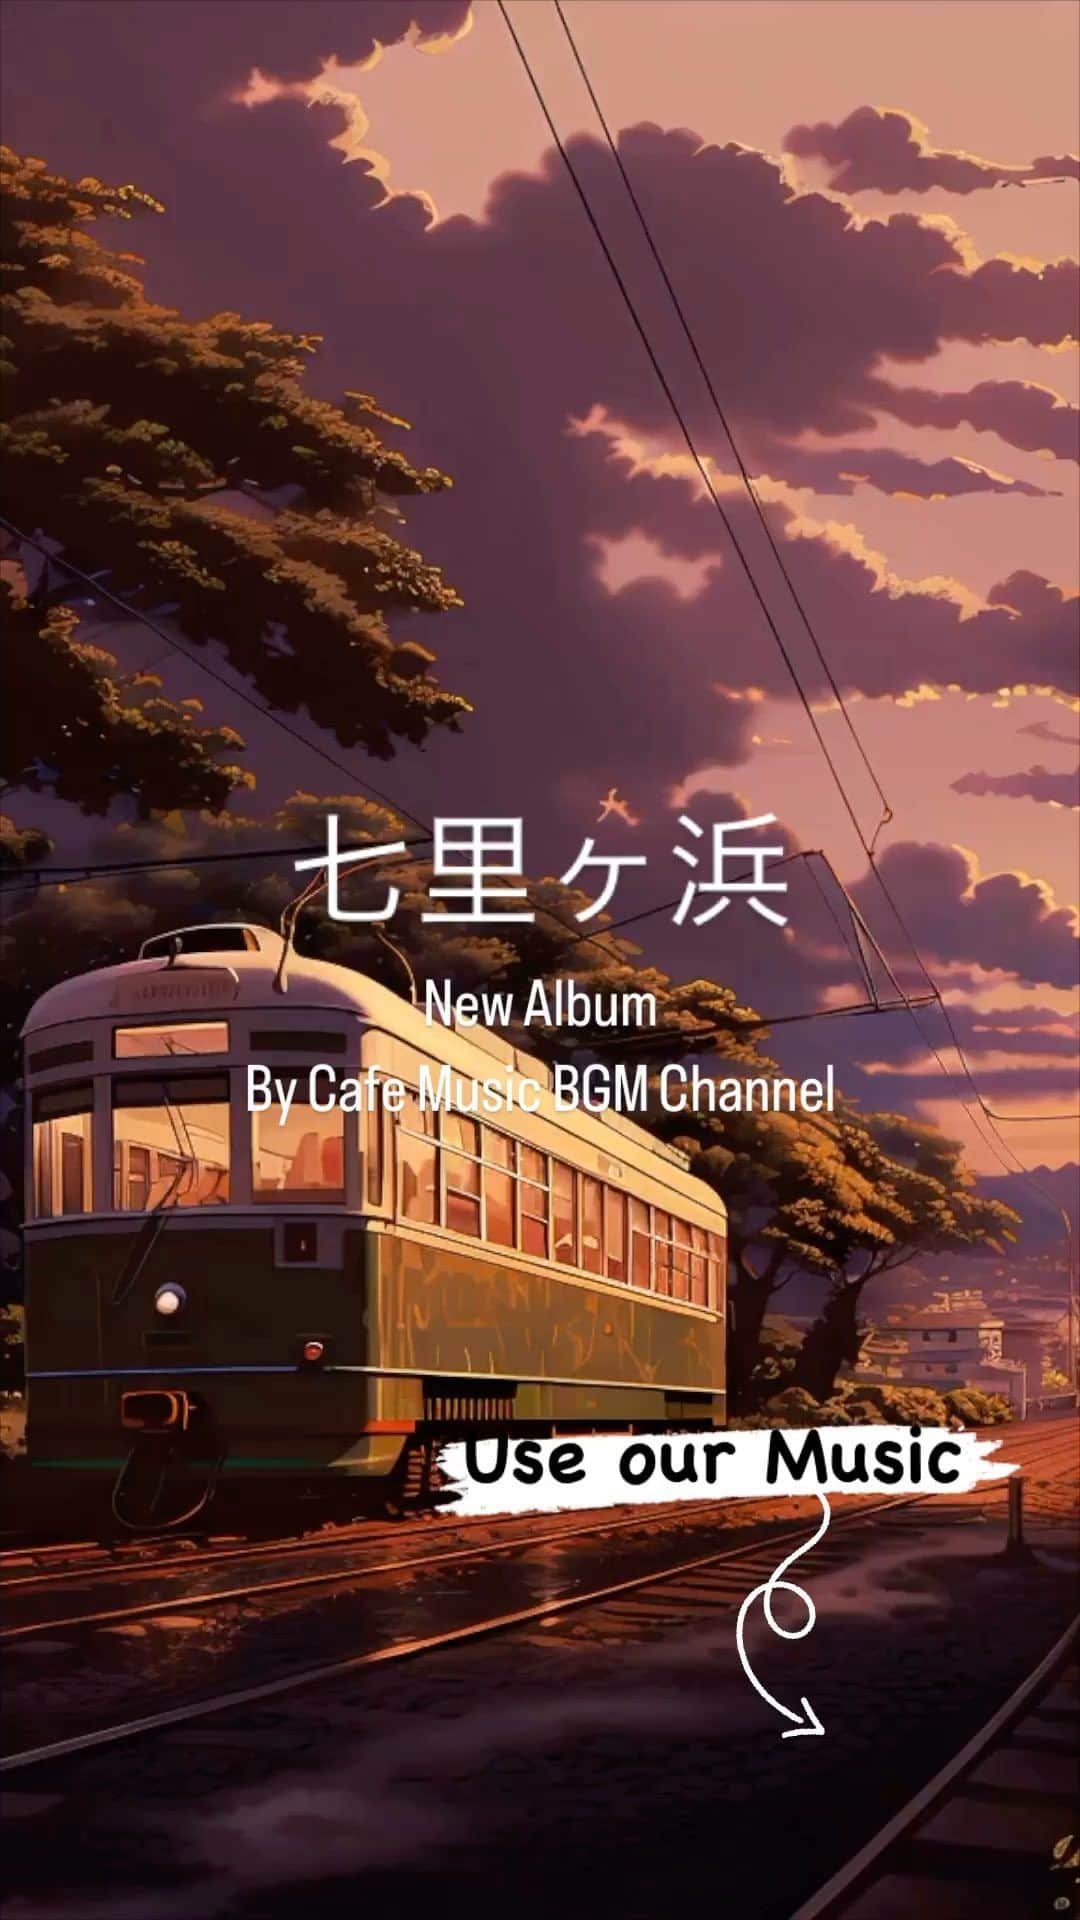 Cafe Music BGM channelのインスタグラム：「Explore the Sounds of '七里ヶ浜' 🌍 New Jazz & World Music by BGM Channel #NewMusic #JazzWorld #JazzVibe  💿 Listen Everywhere: https://bgmc.lnk.to/hC7AGJQL 🎵 BGM channel: https://lnk.to/TZWnnMjq  ／ 🎂 New Release ＼ October 20th In Stores 🎧 七里ヶ浜 By BGM channel  #EverydayMusic #七里ヶ浜 #BGMChannel #JazzWorldMusic #RelaxingMelodies #CalmAmbiance #WorldSounds #NewMusicDiscovery」